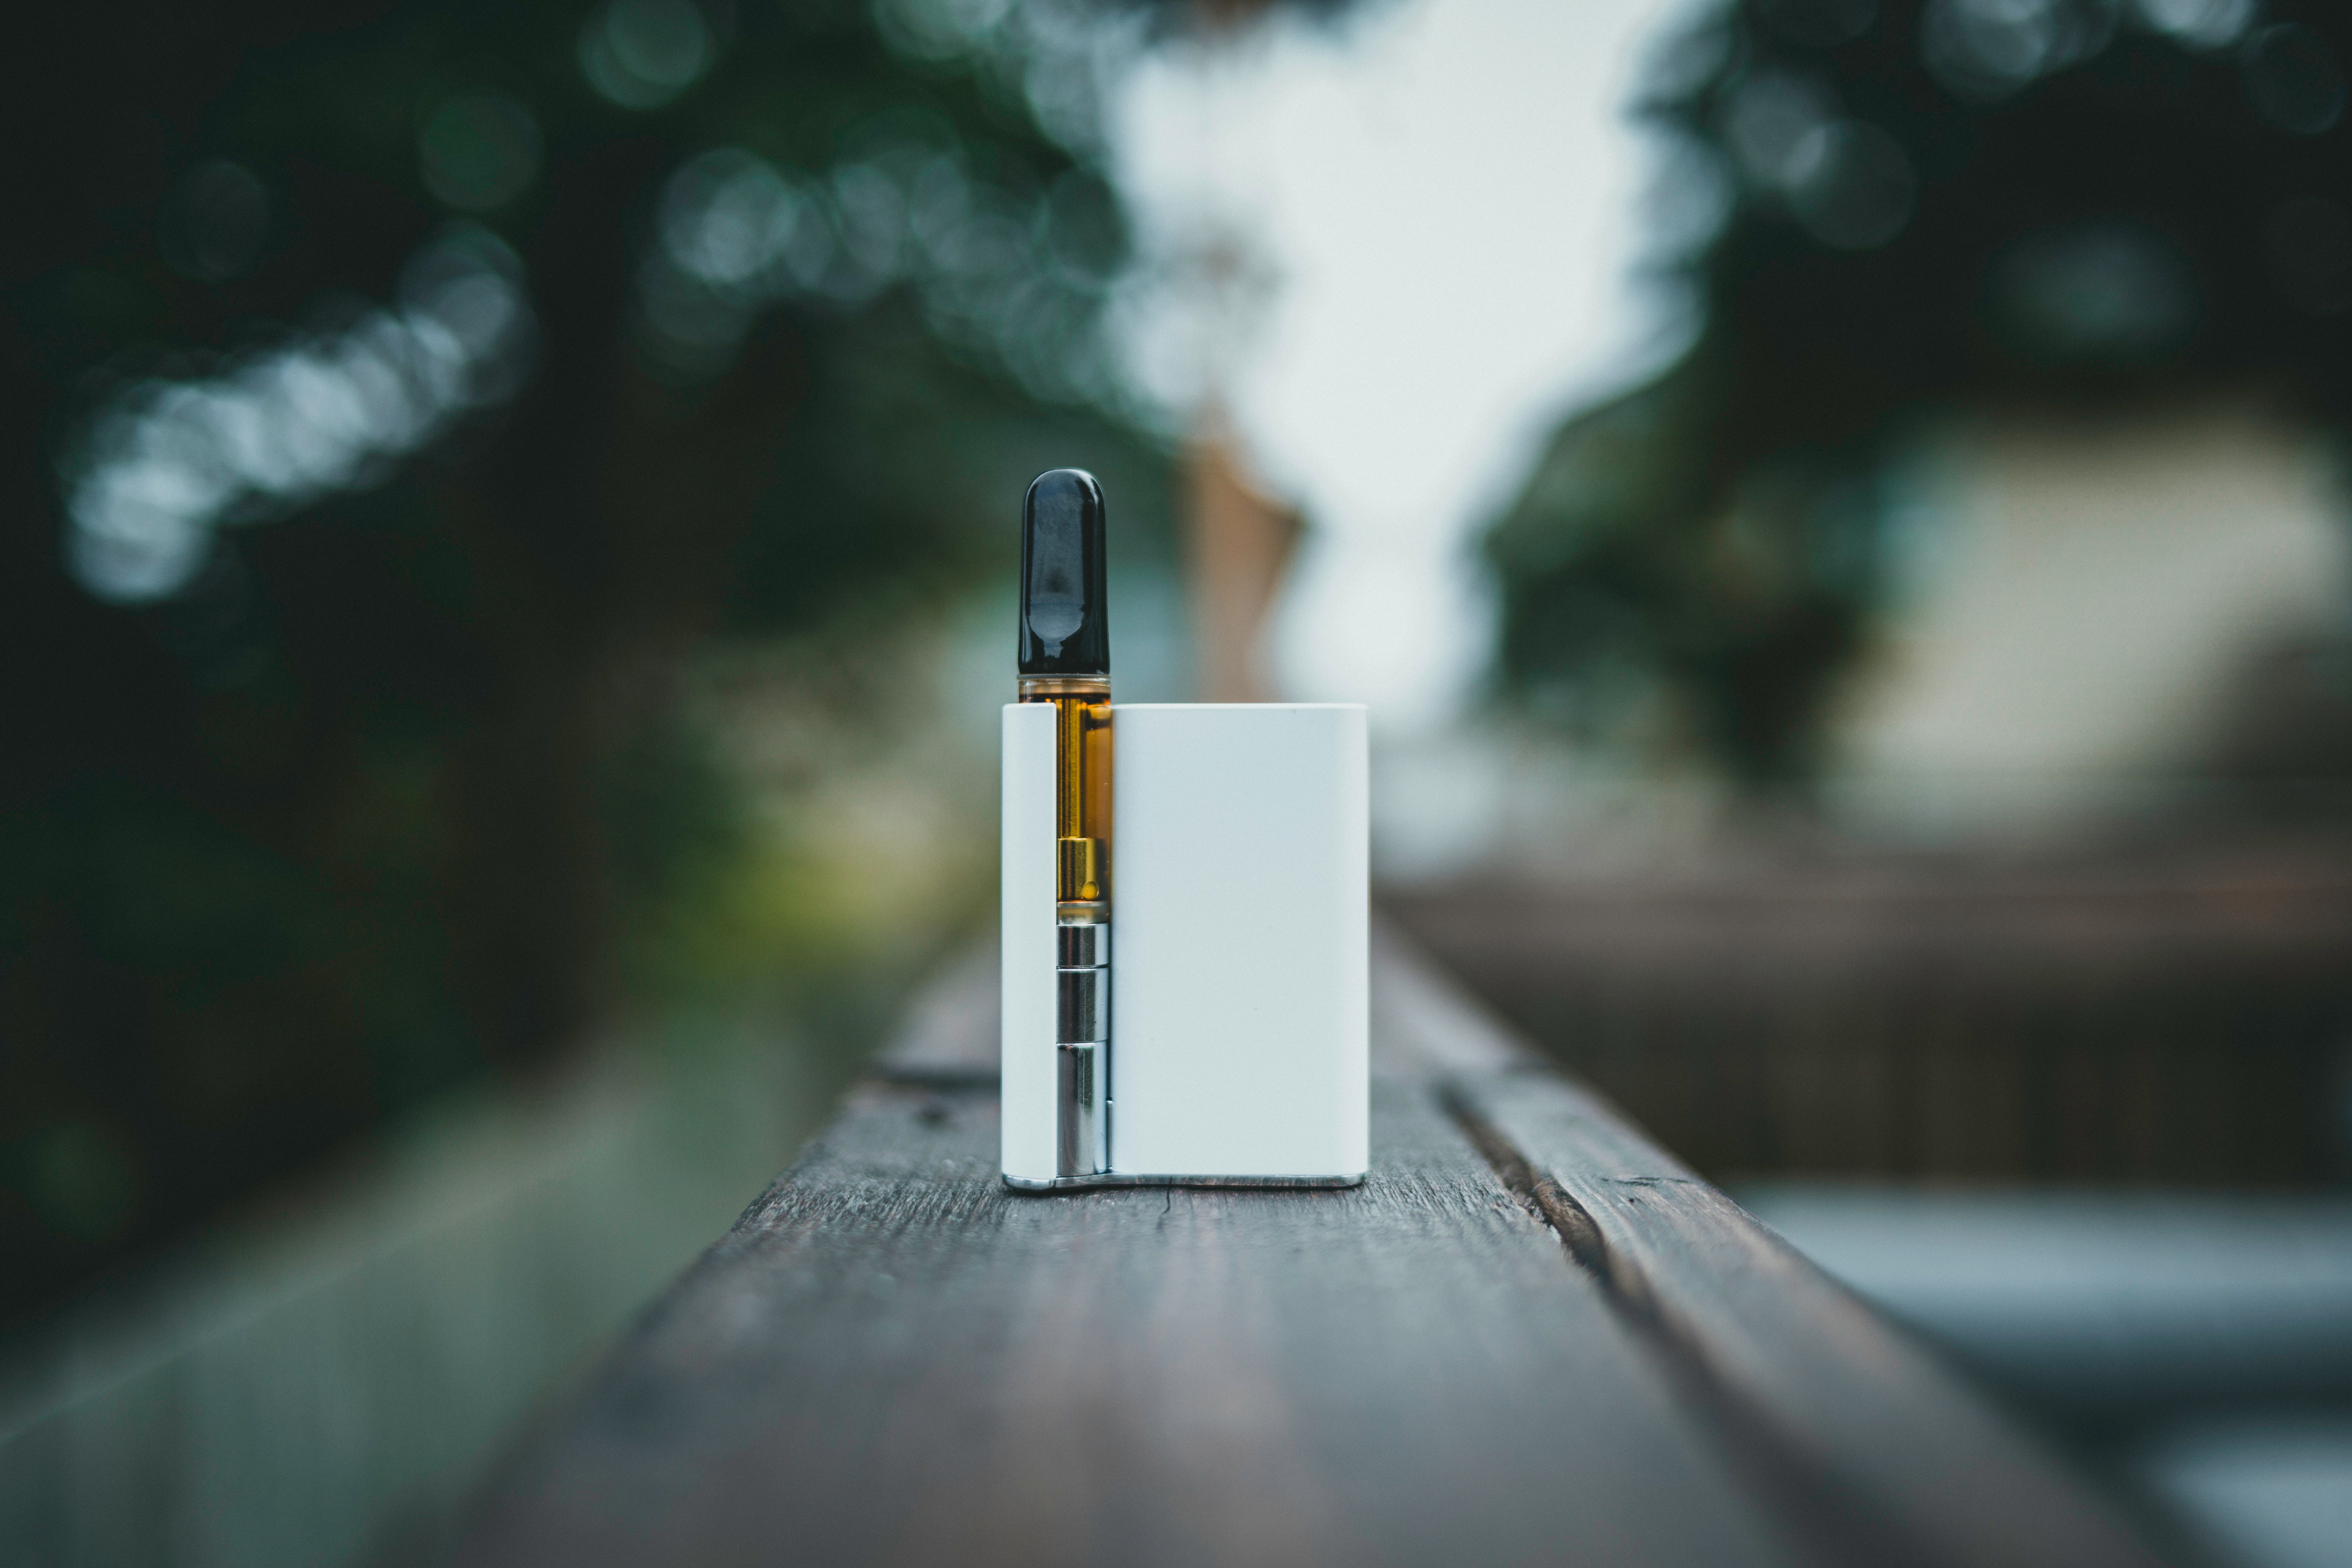 "A device used for vaping is shown on a wooden surface with a forest background"